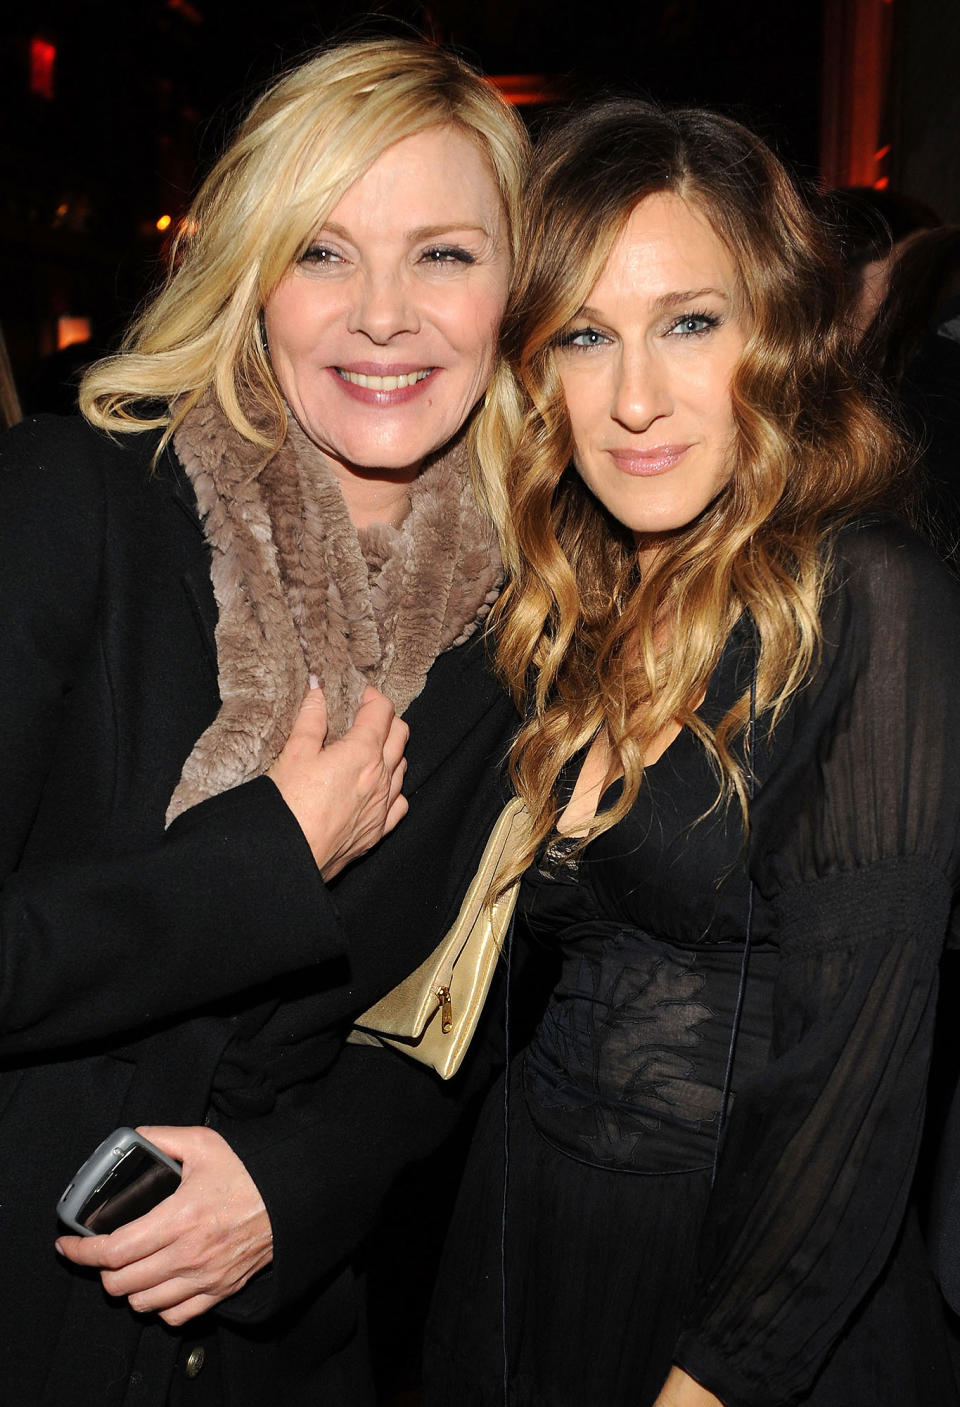 Sarah Jessica Parker Says She's Not in a 'Catfight' with Kim Cattrall